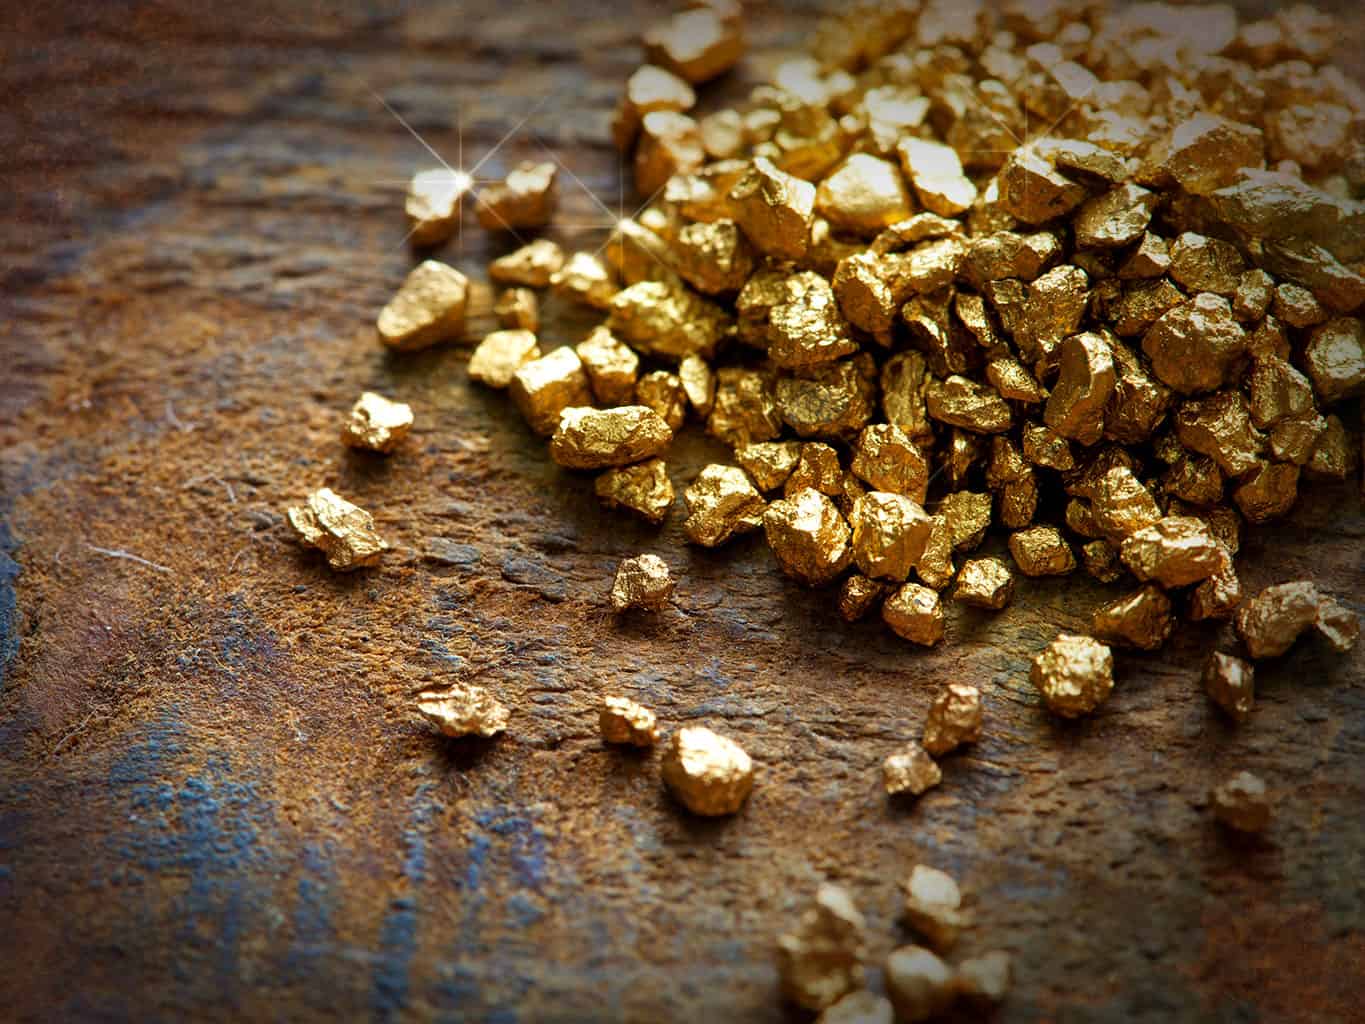 Zim losing US$157m monthly to gold smuggling- report